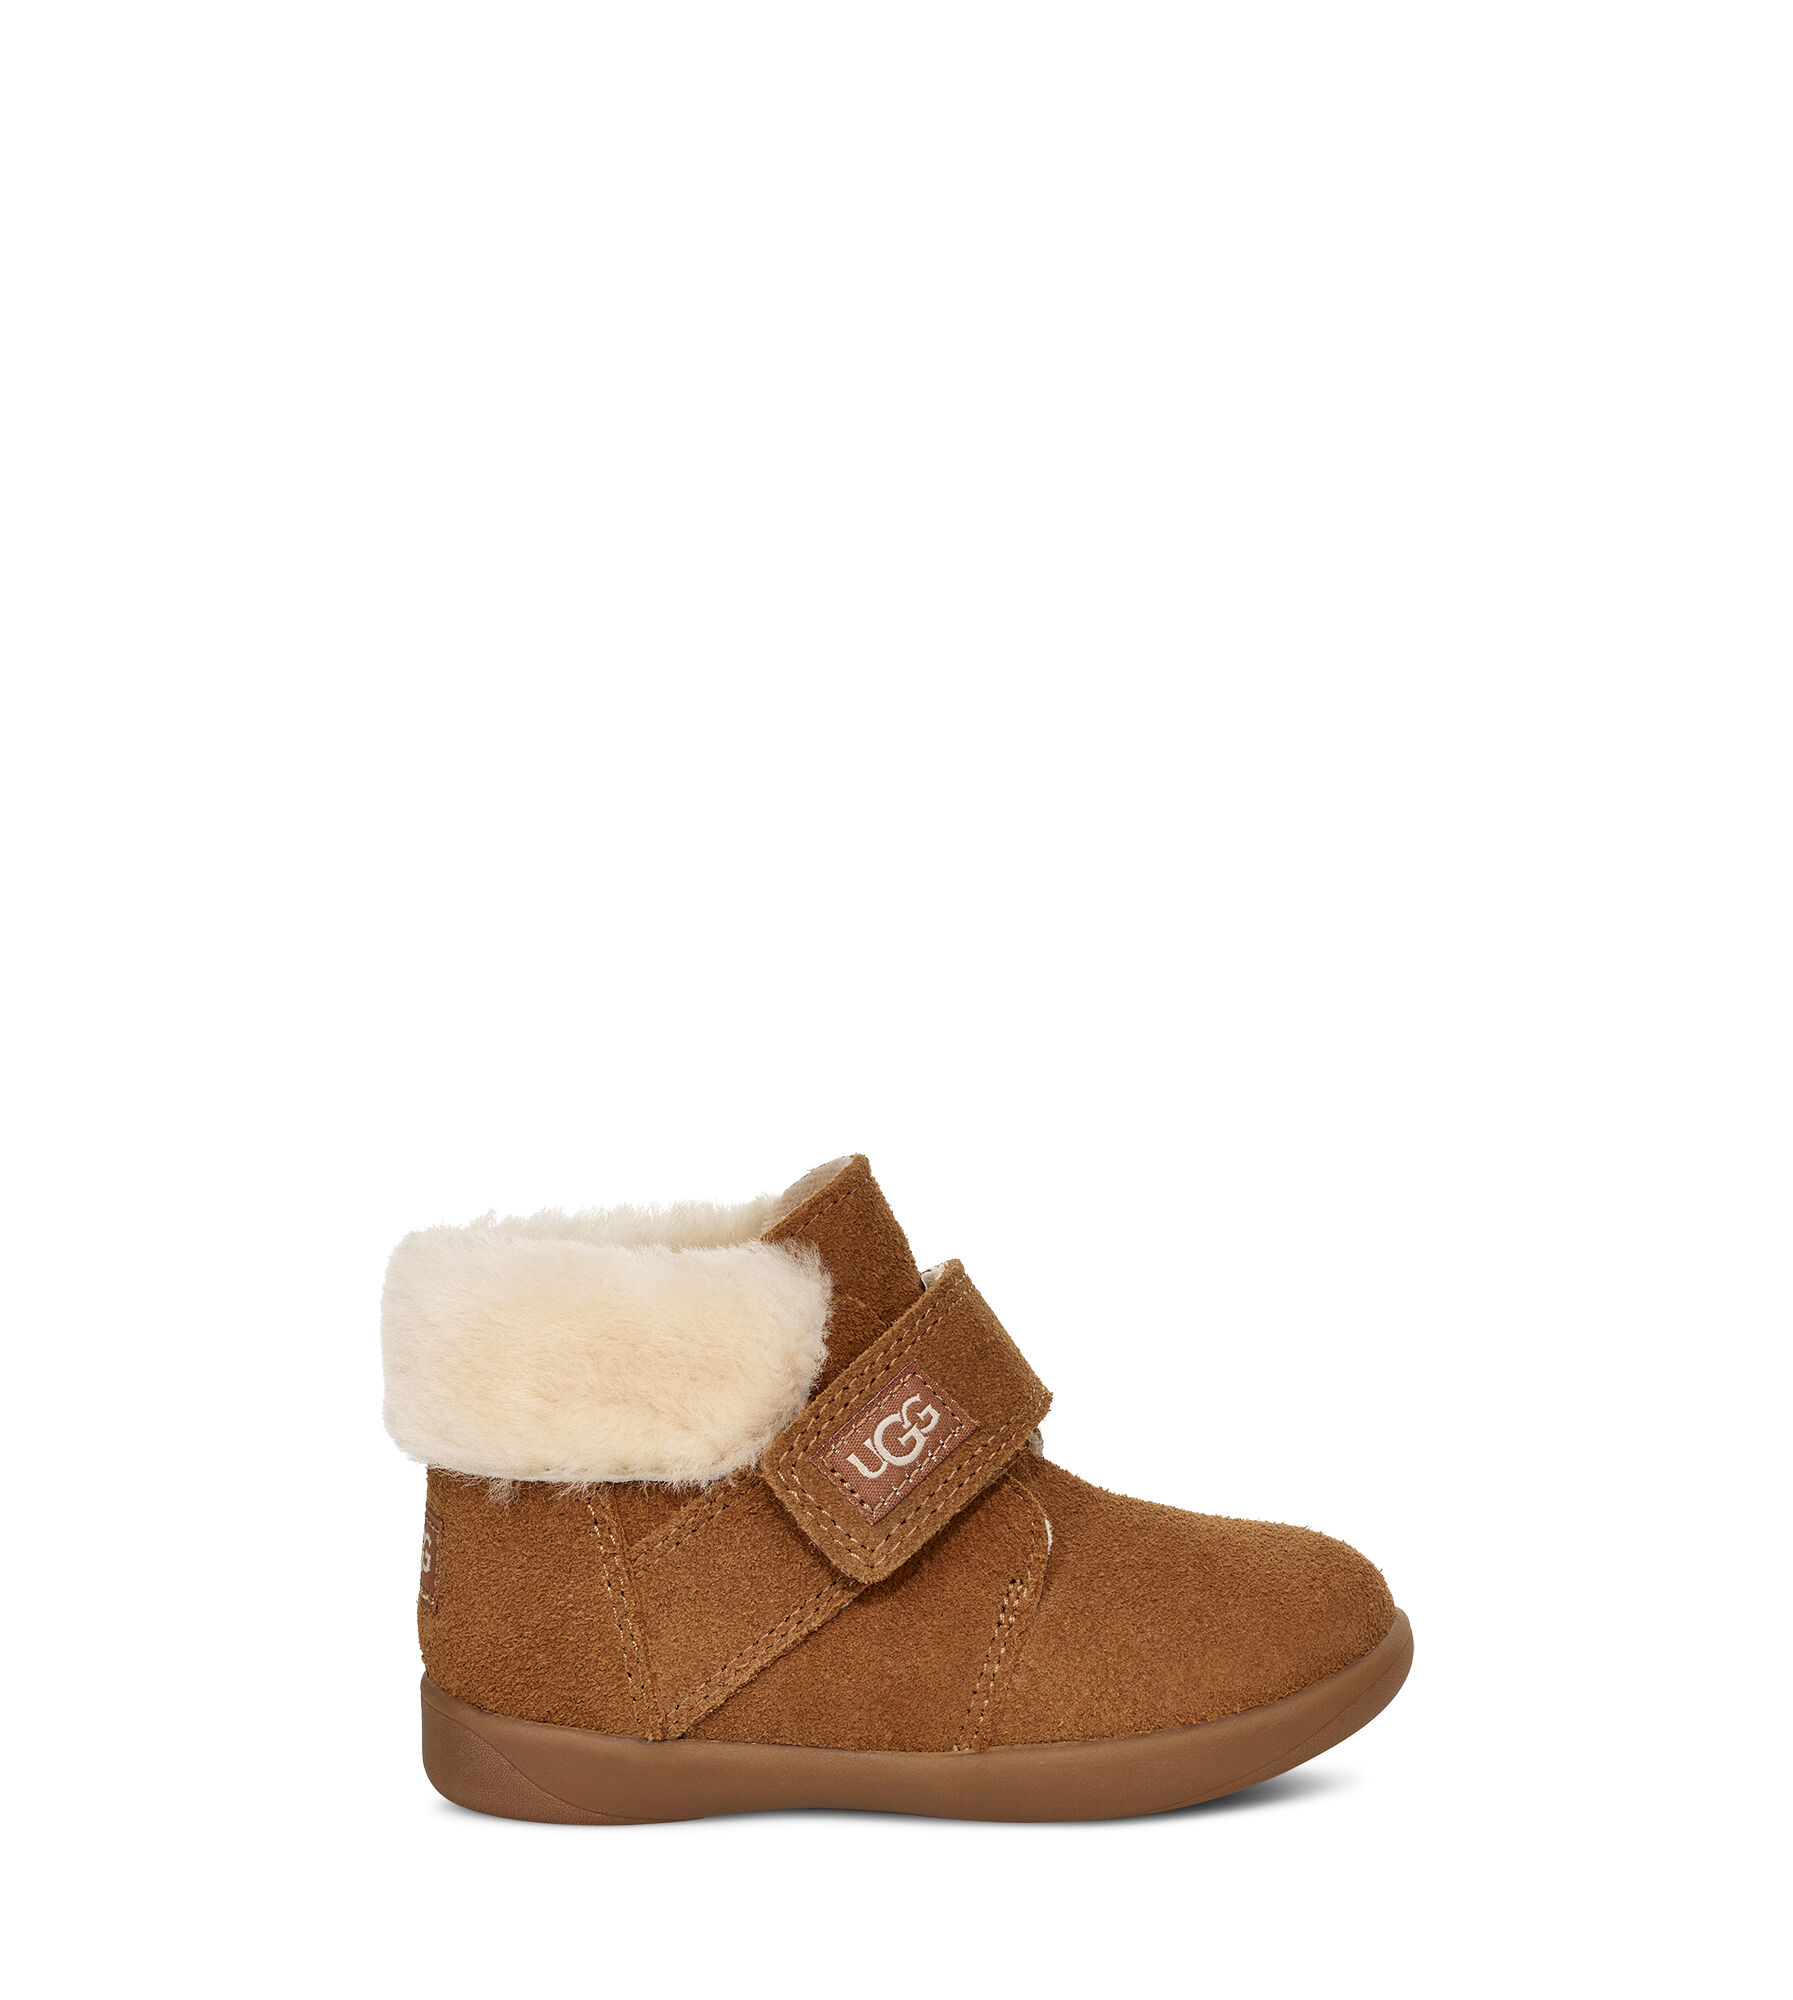 uggs for toddlers size 6